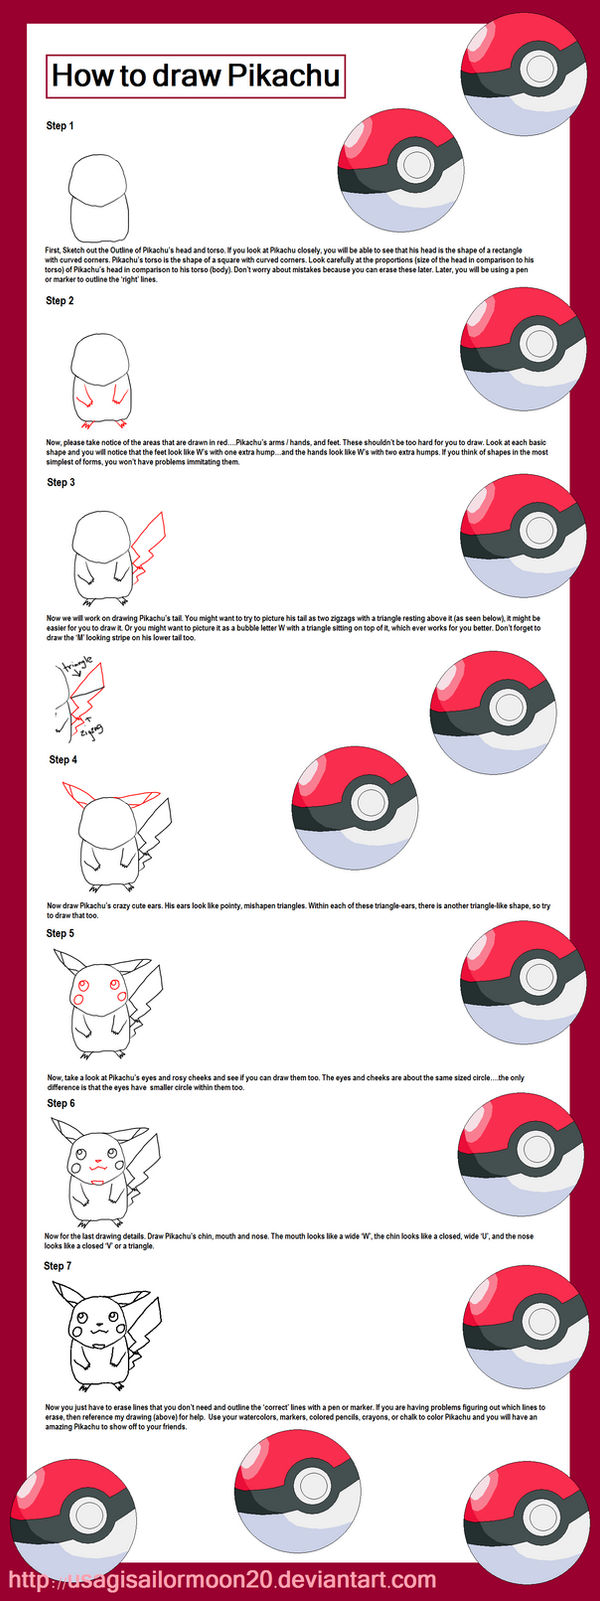 How To Draw Pikachu From Pokemon By Usagisailormoon20 On